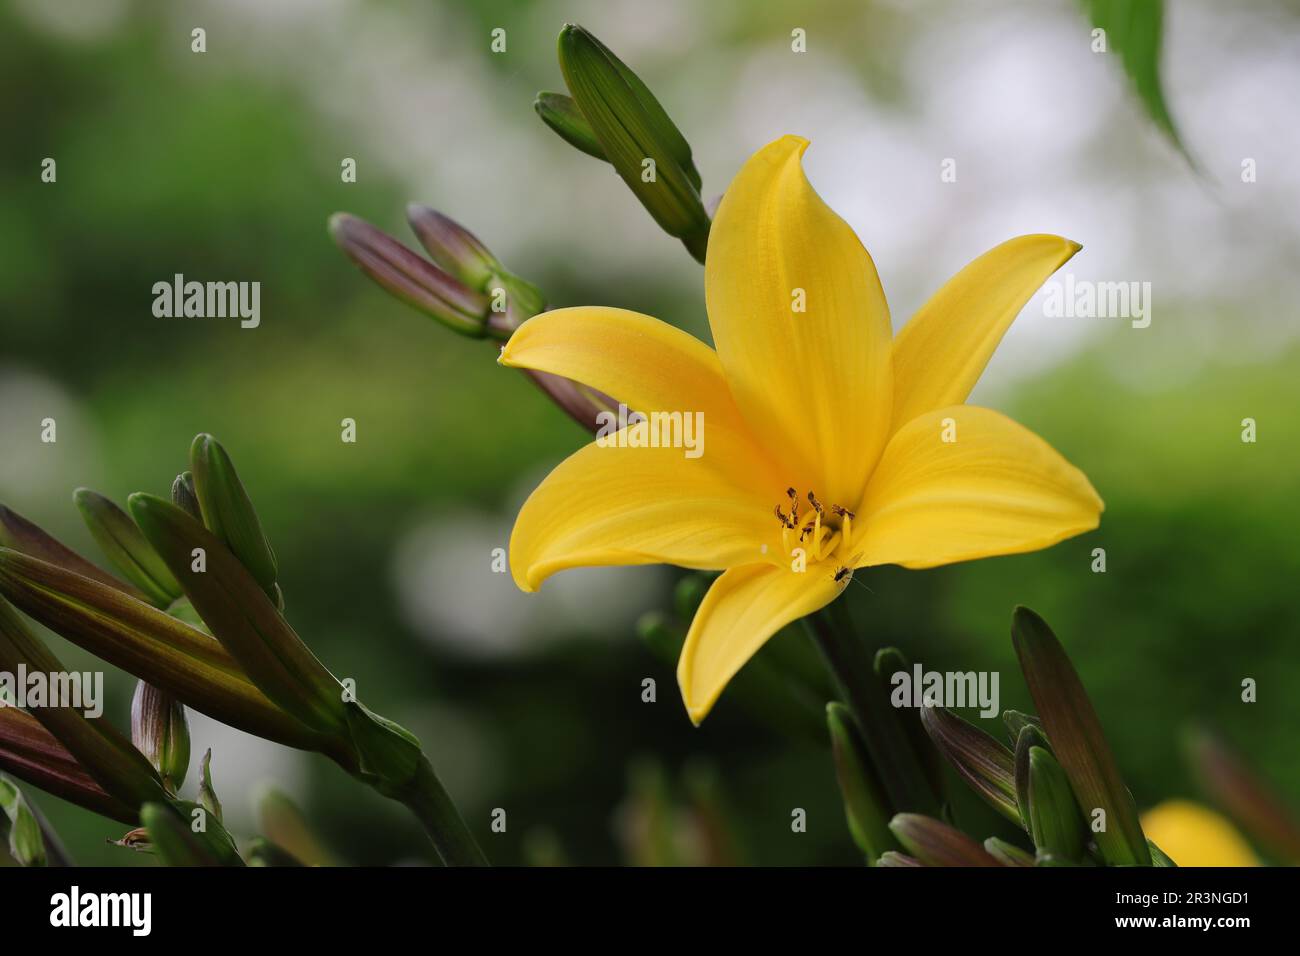 close-up of a beautiful yellow hemerocallis flower against a natural blurry background Stock Photo